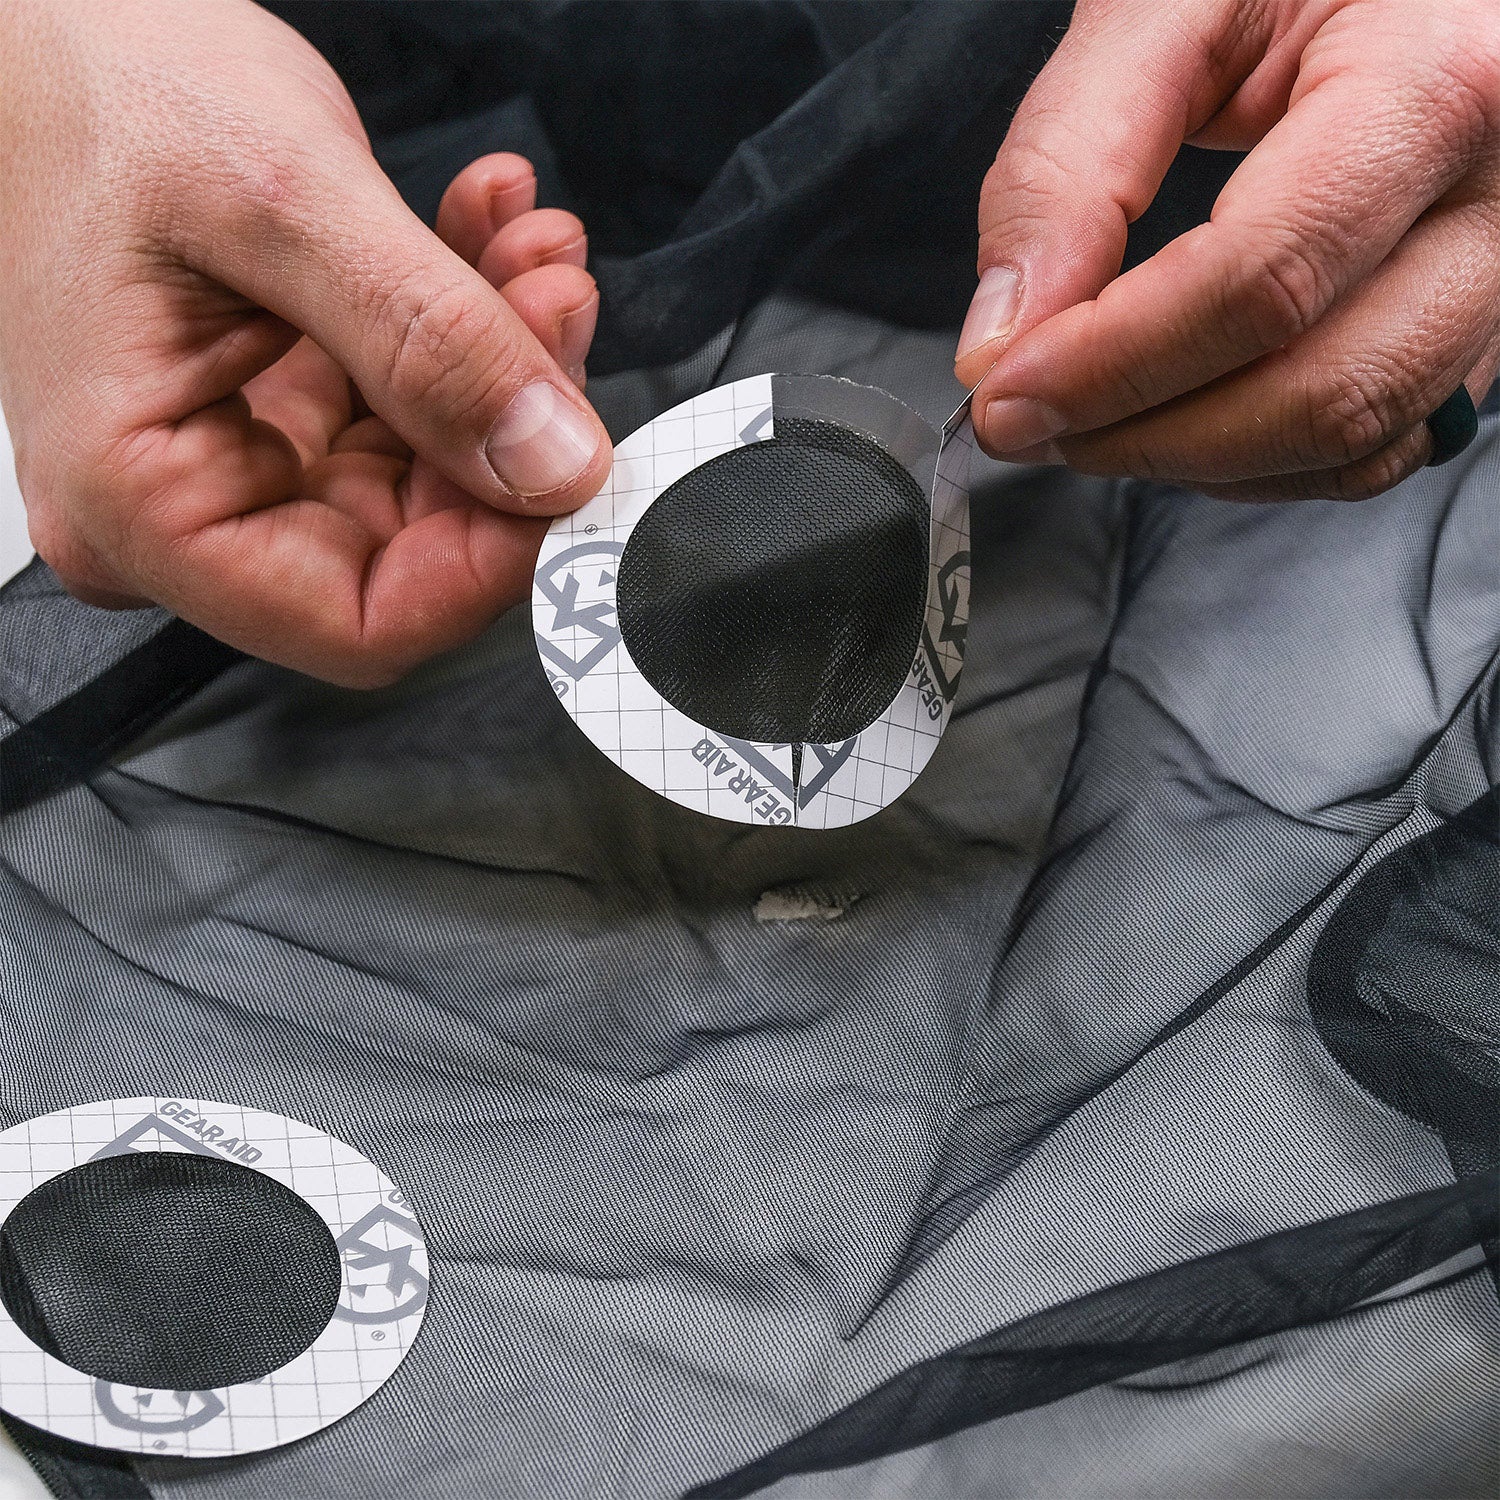 Field Repair Patch Kit - Fix broken items, stitch torn bags, parch tent  rips, and seal holes. – Superesse Straps LLC